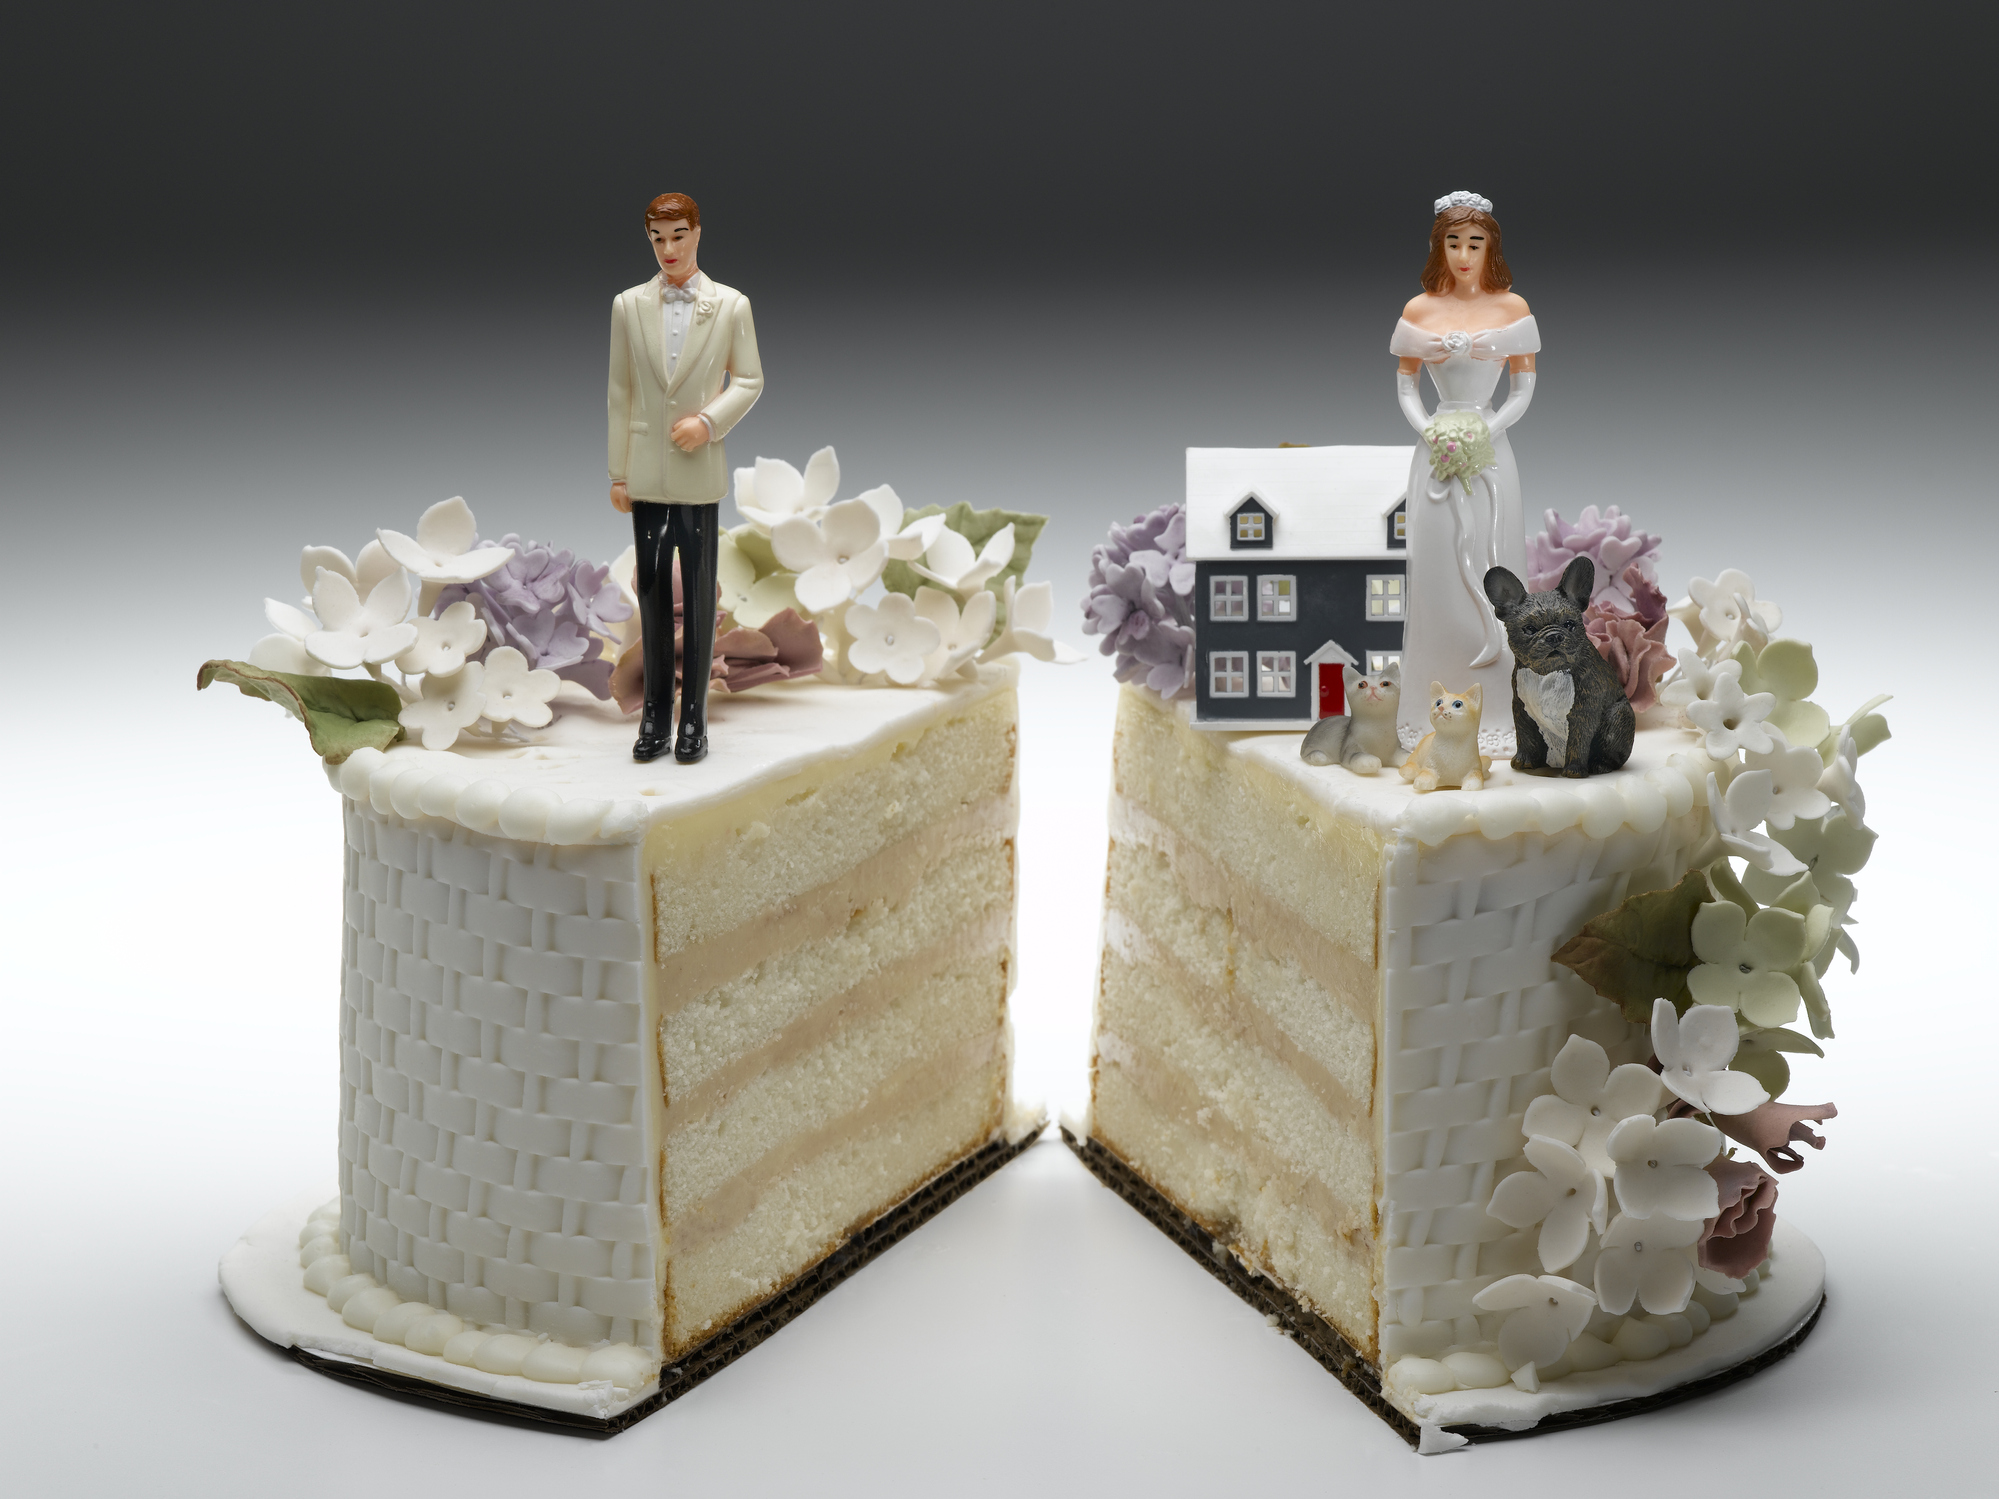 bride-and-groom-figurines-standing-on-two-separated-slices-of-wedding-cakejpg